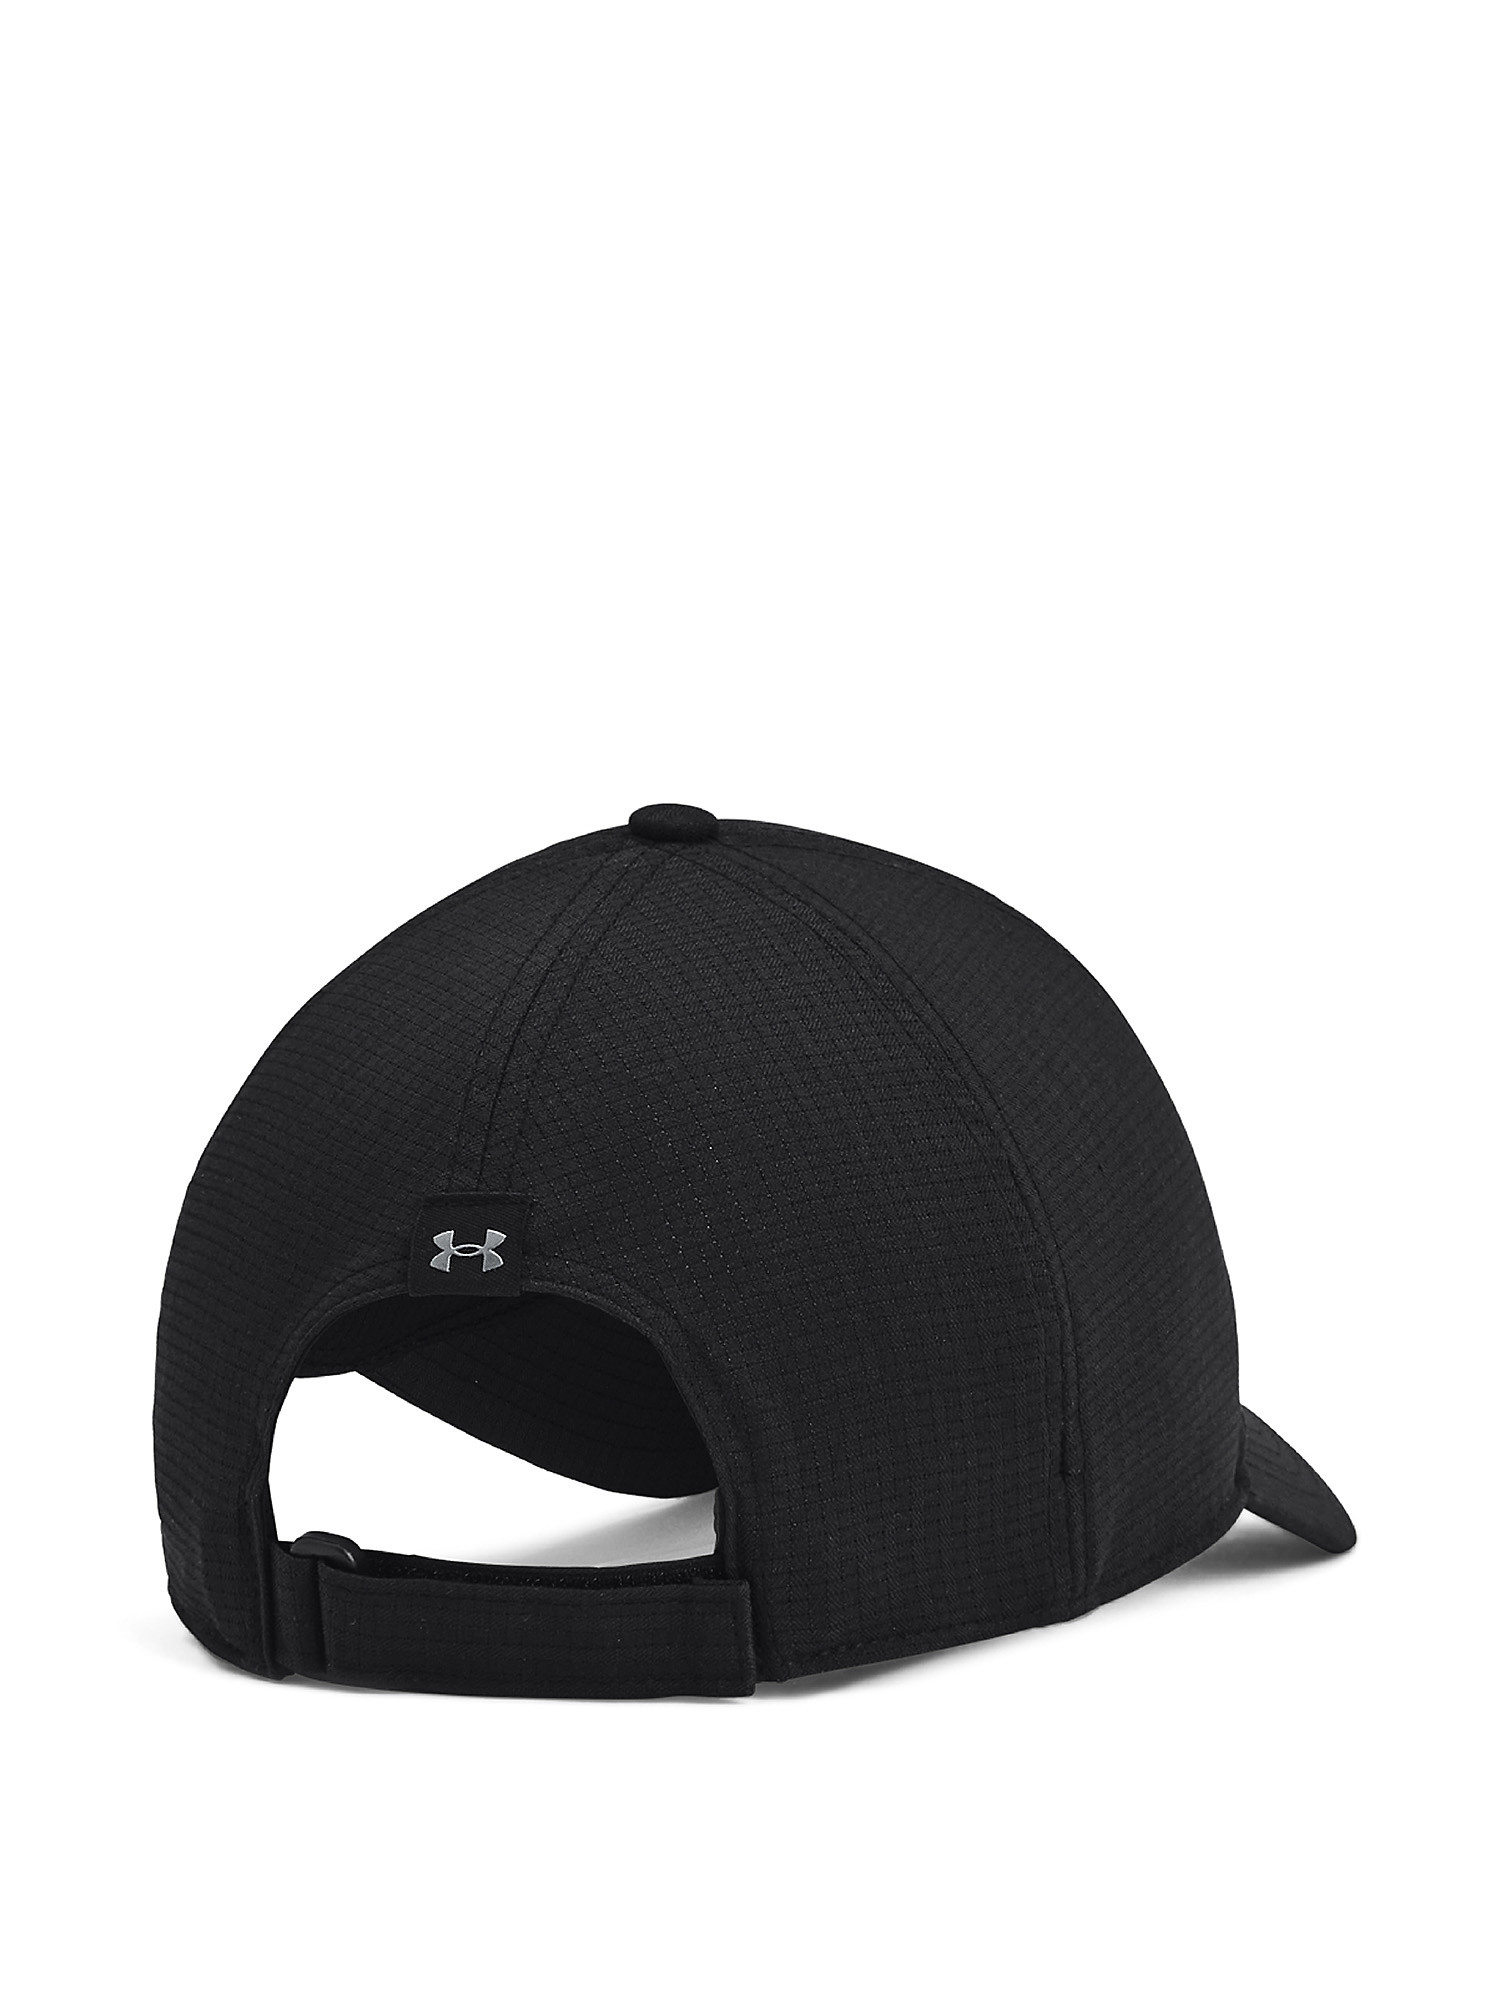 Under Armour - Cappello UA Iso-Chill ArmourVent™ Adjustable, Nero, large image number 1